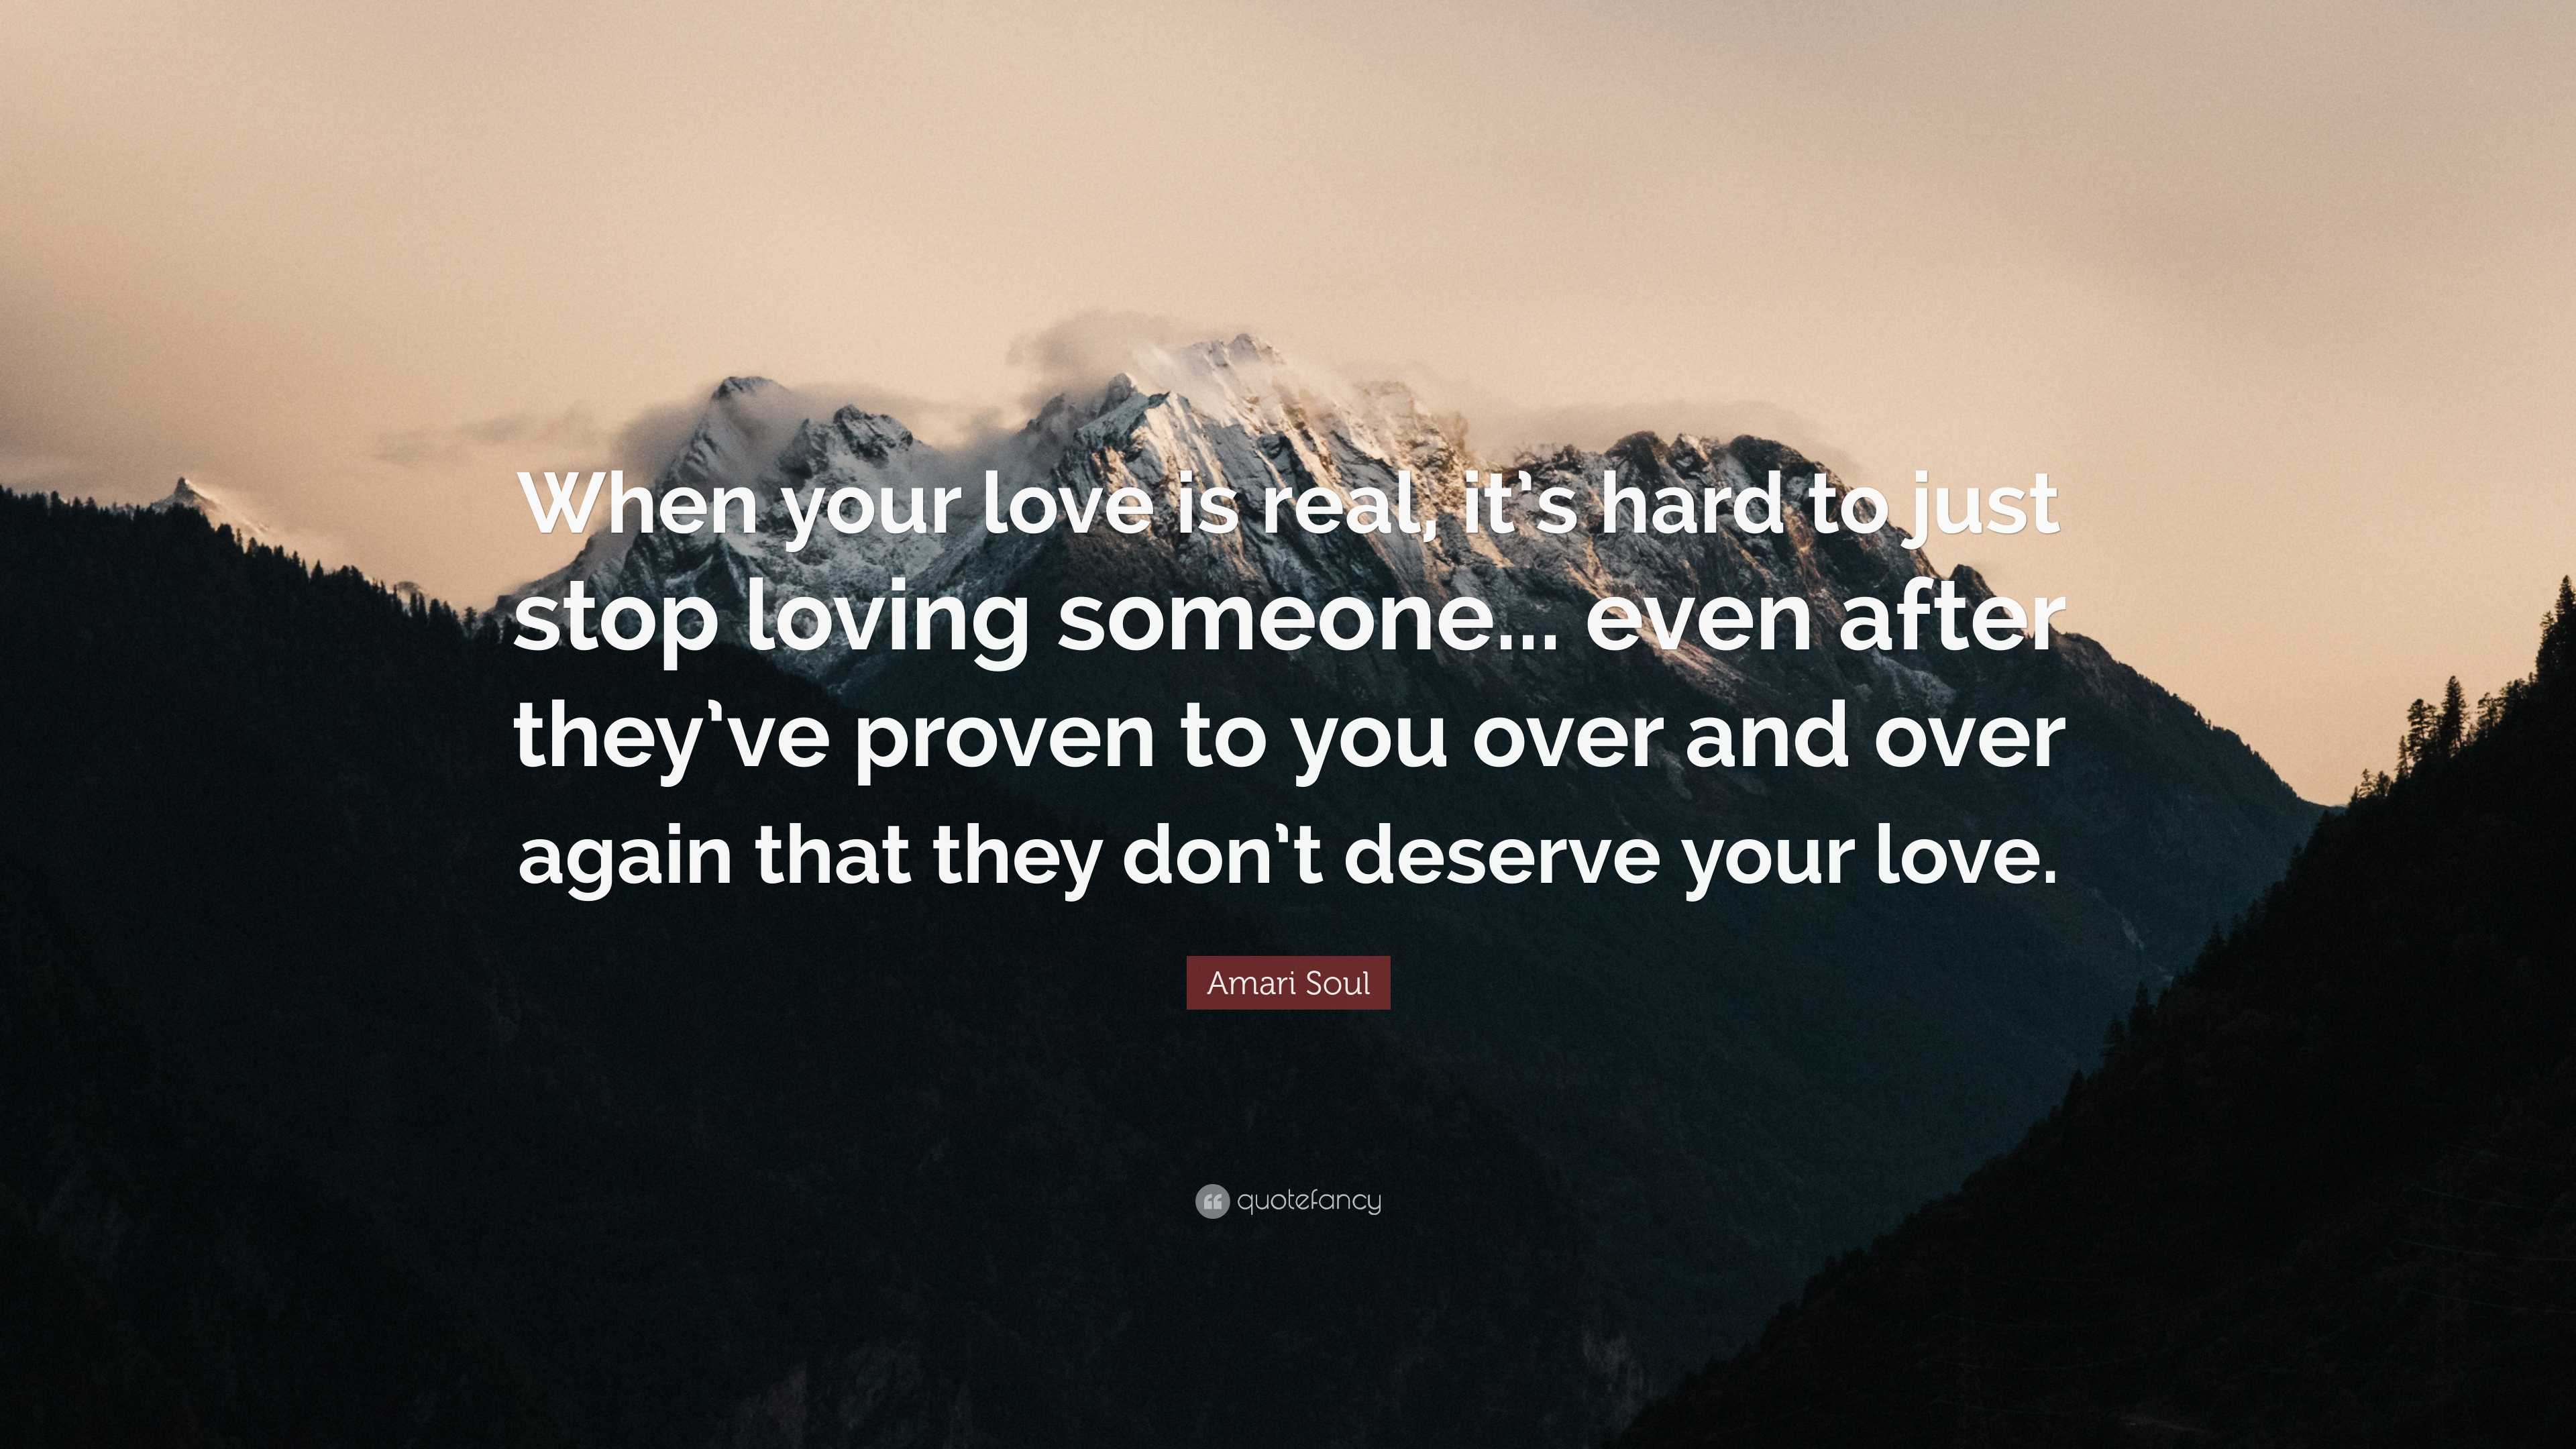 Why is Love So Hard? If It's True Love, It's Totally Worth It